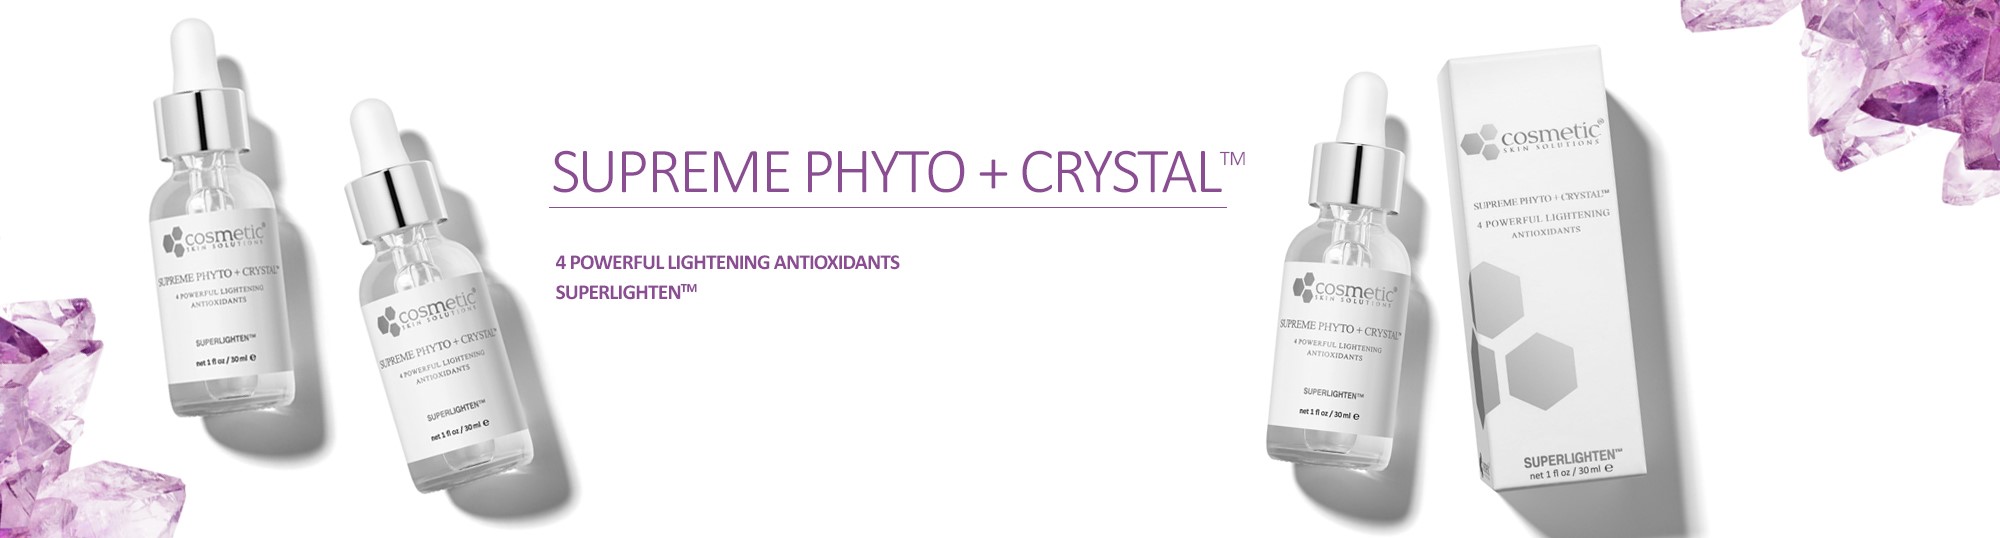 Supreme Phyto + Crystal™ | 4 Lightening ingredients | SUPERLIGHTEN™ Combines SUPERLIGHTEN™ ingredient technology with low molecular weight hyaluronic acid for timed release of lightening ingredients, thus increasing efficacy.